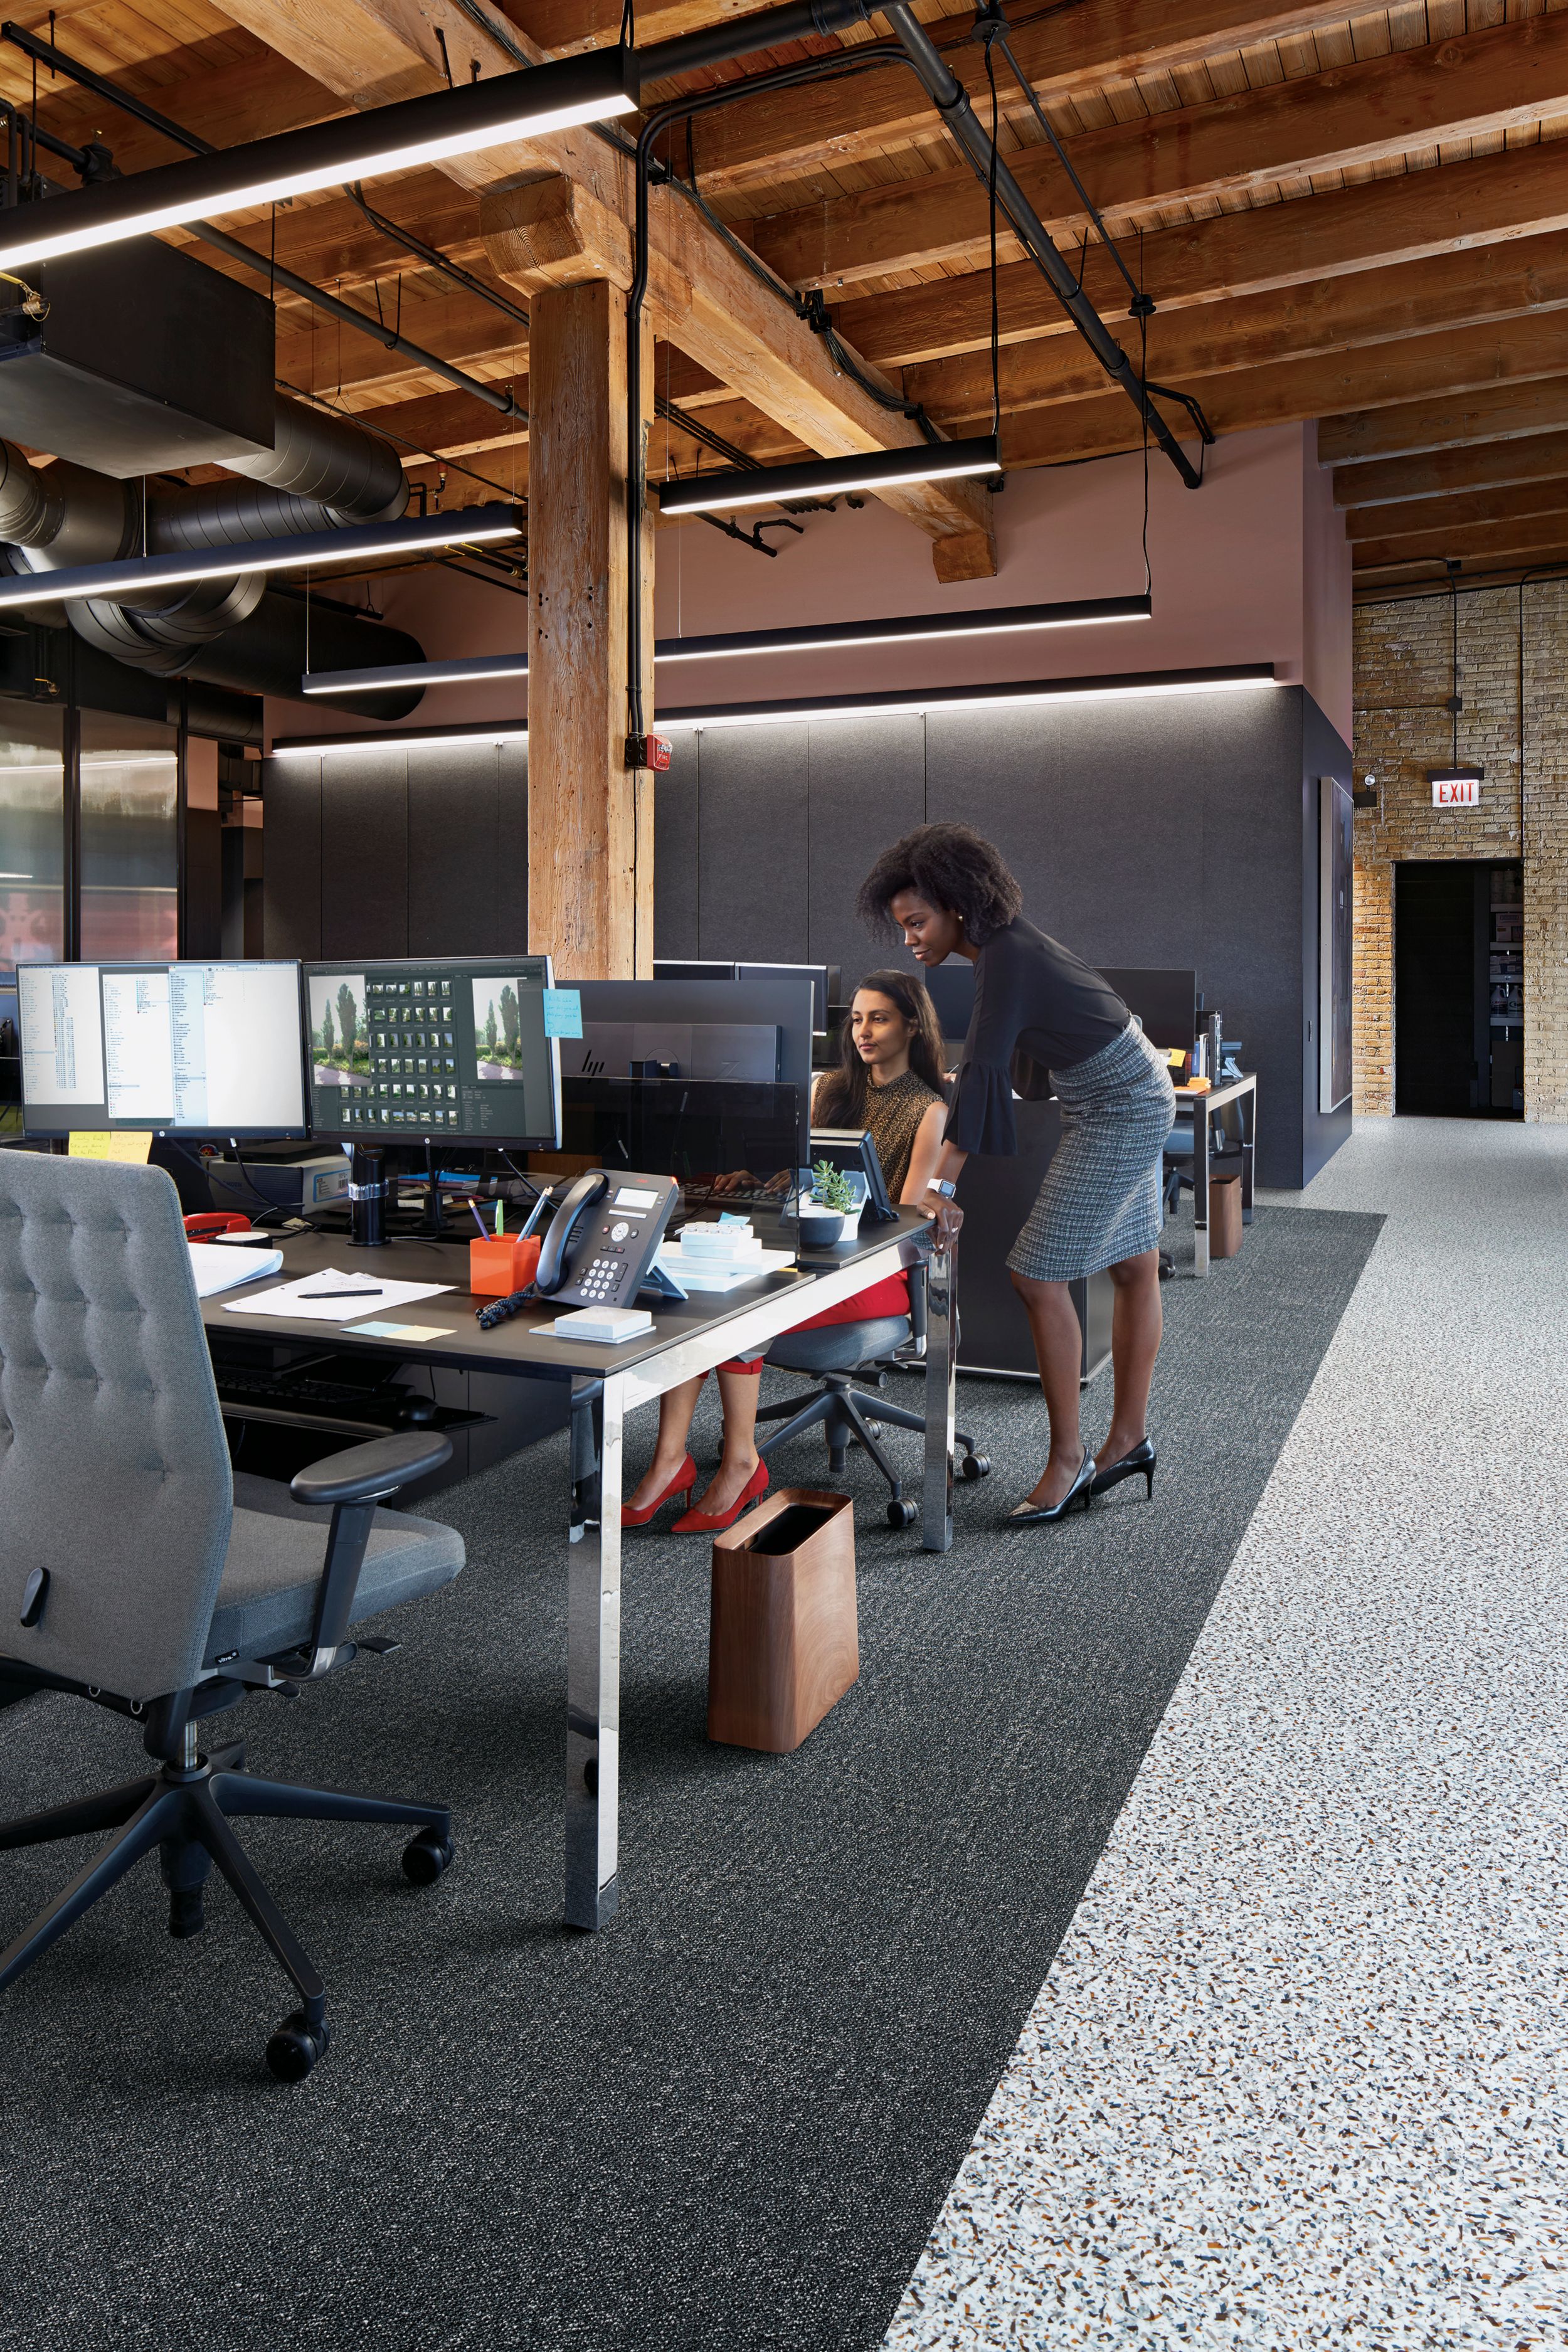 Interface Step it Up and Walk on By carpet tile in common work space with two people afbeeldingnummer 8